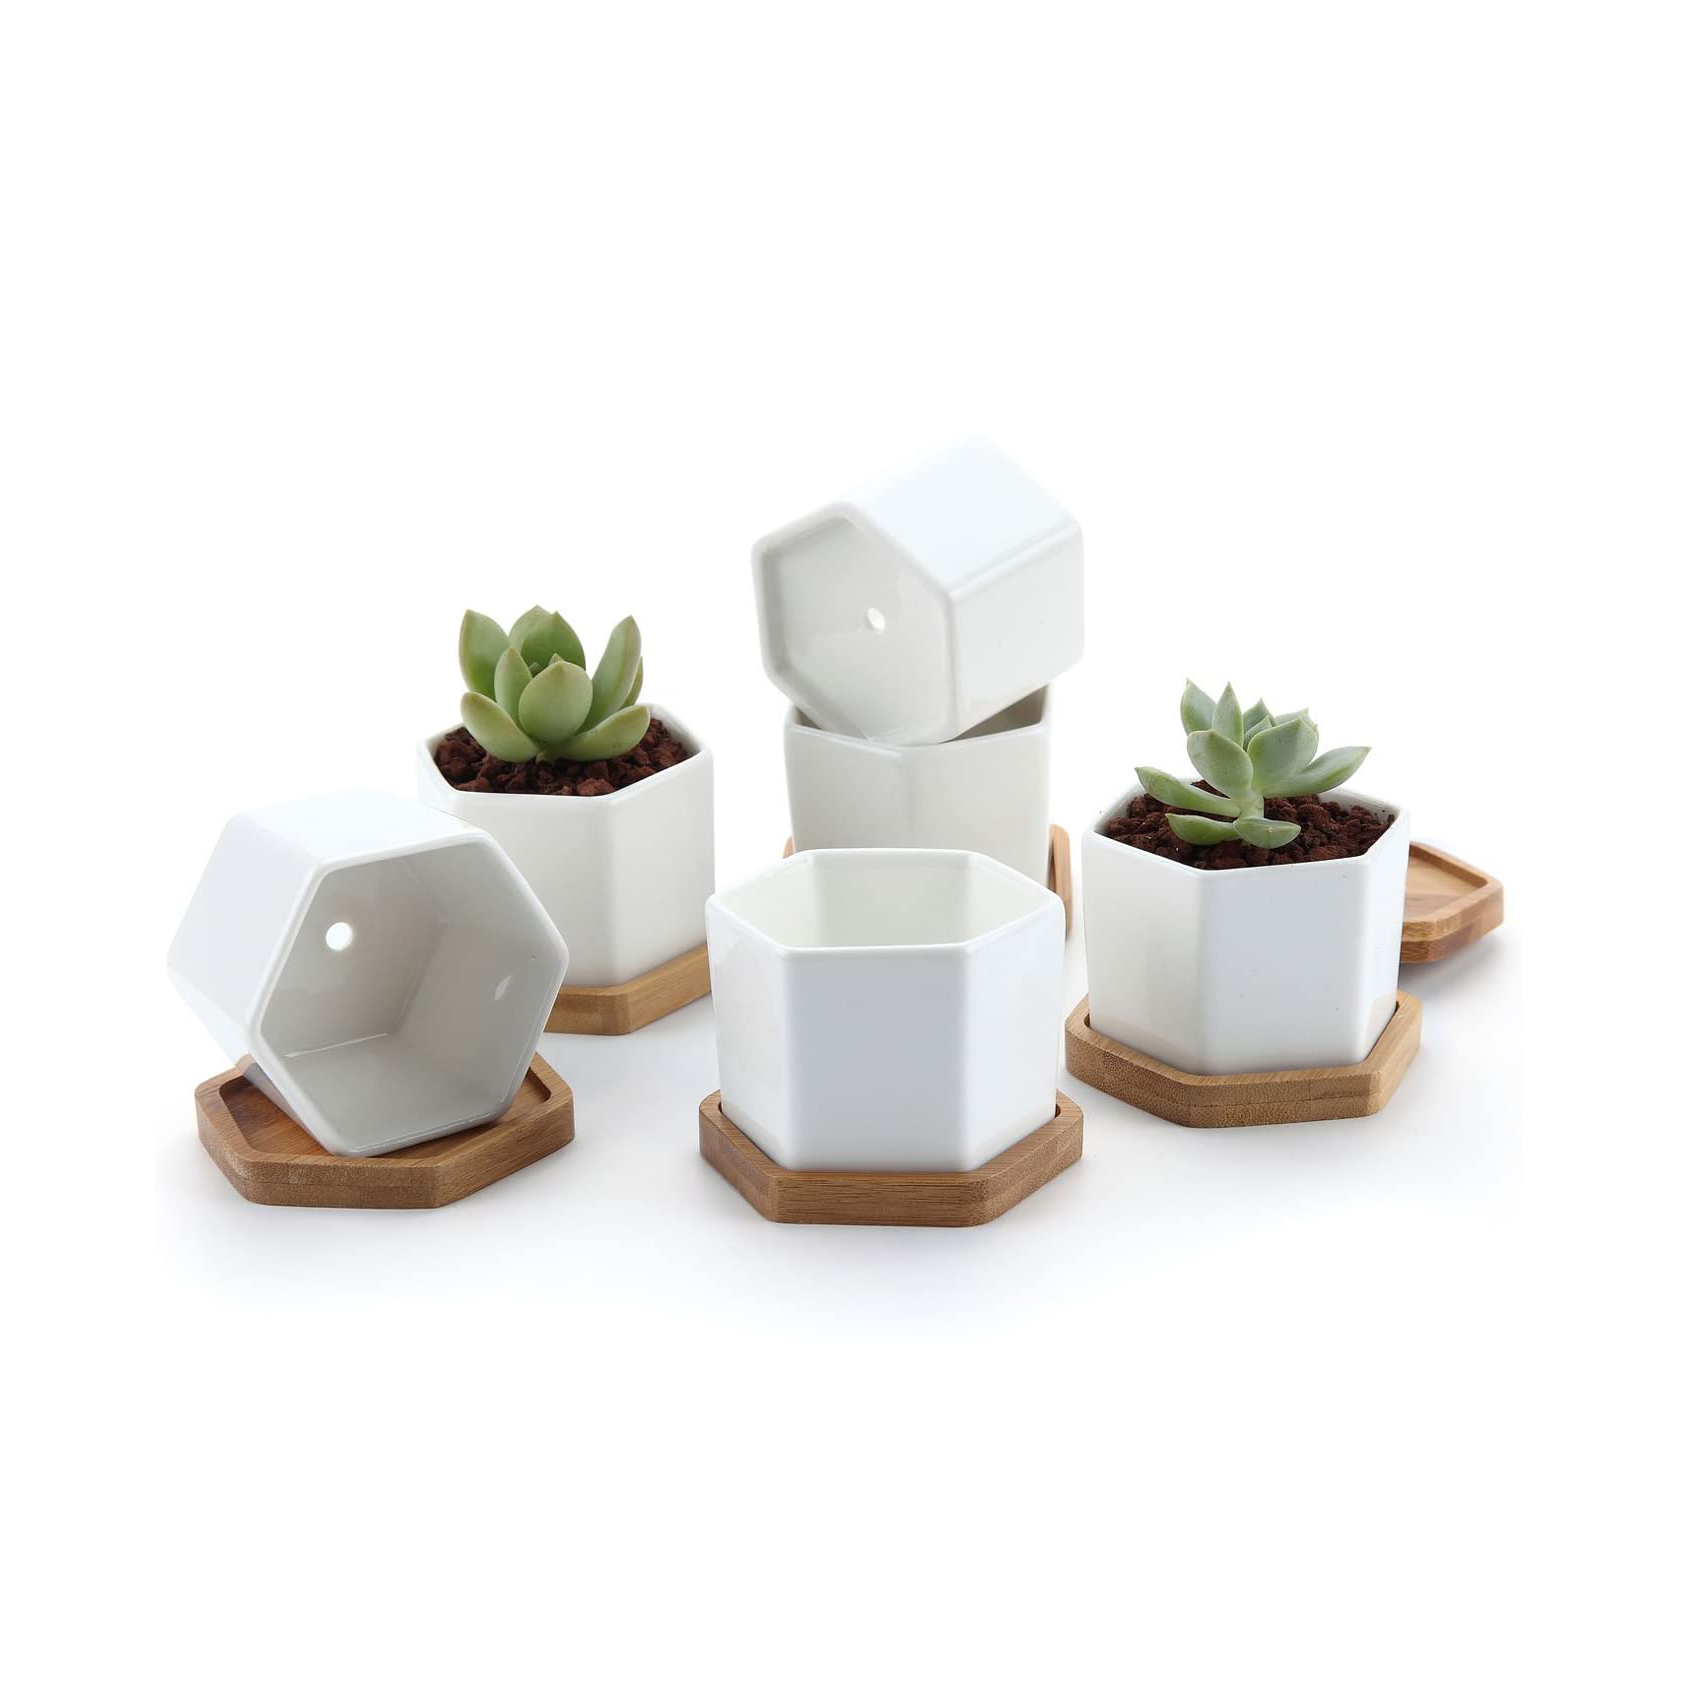 Hexagon Ceramic Succulent Planter Plant Pot With Bamboo Tray